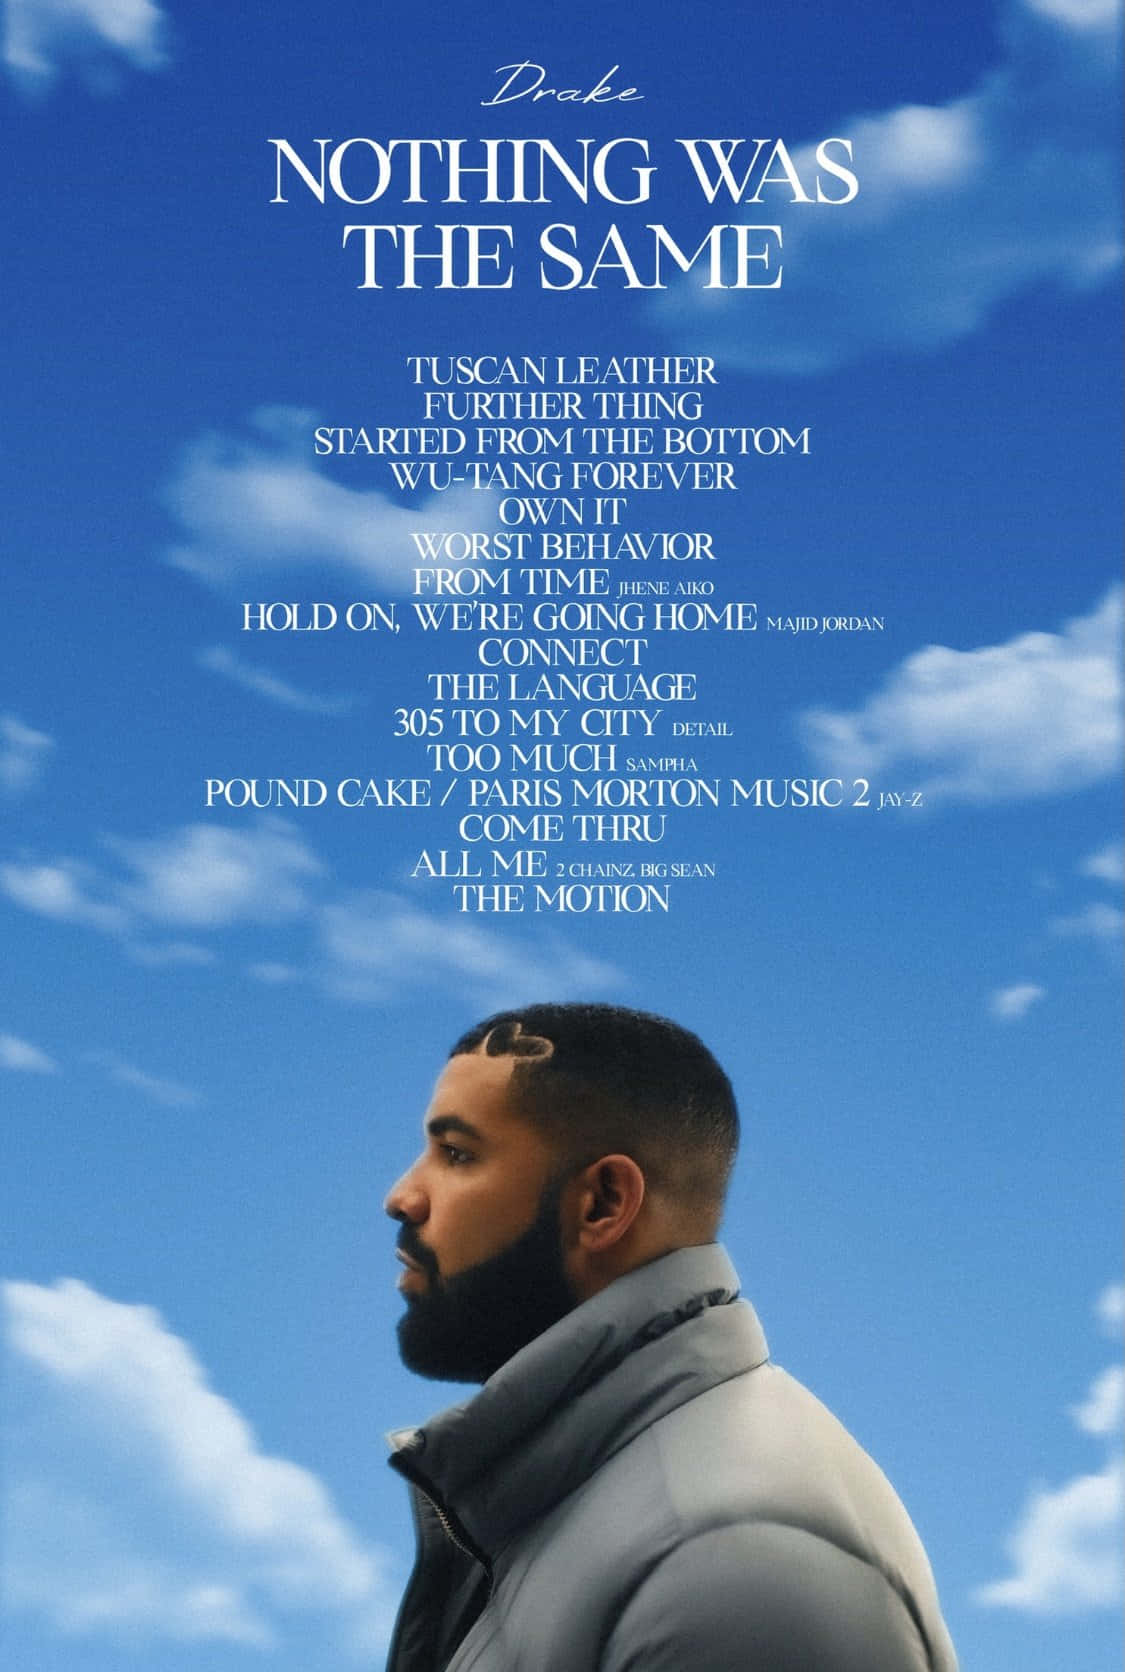 Feel the energy of Drake and his album "Nothing Was The Same". Wallpaper